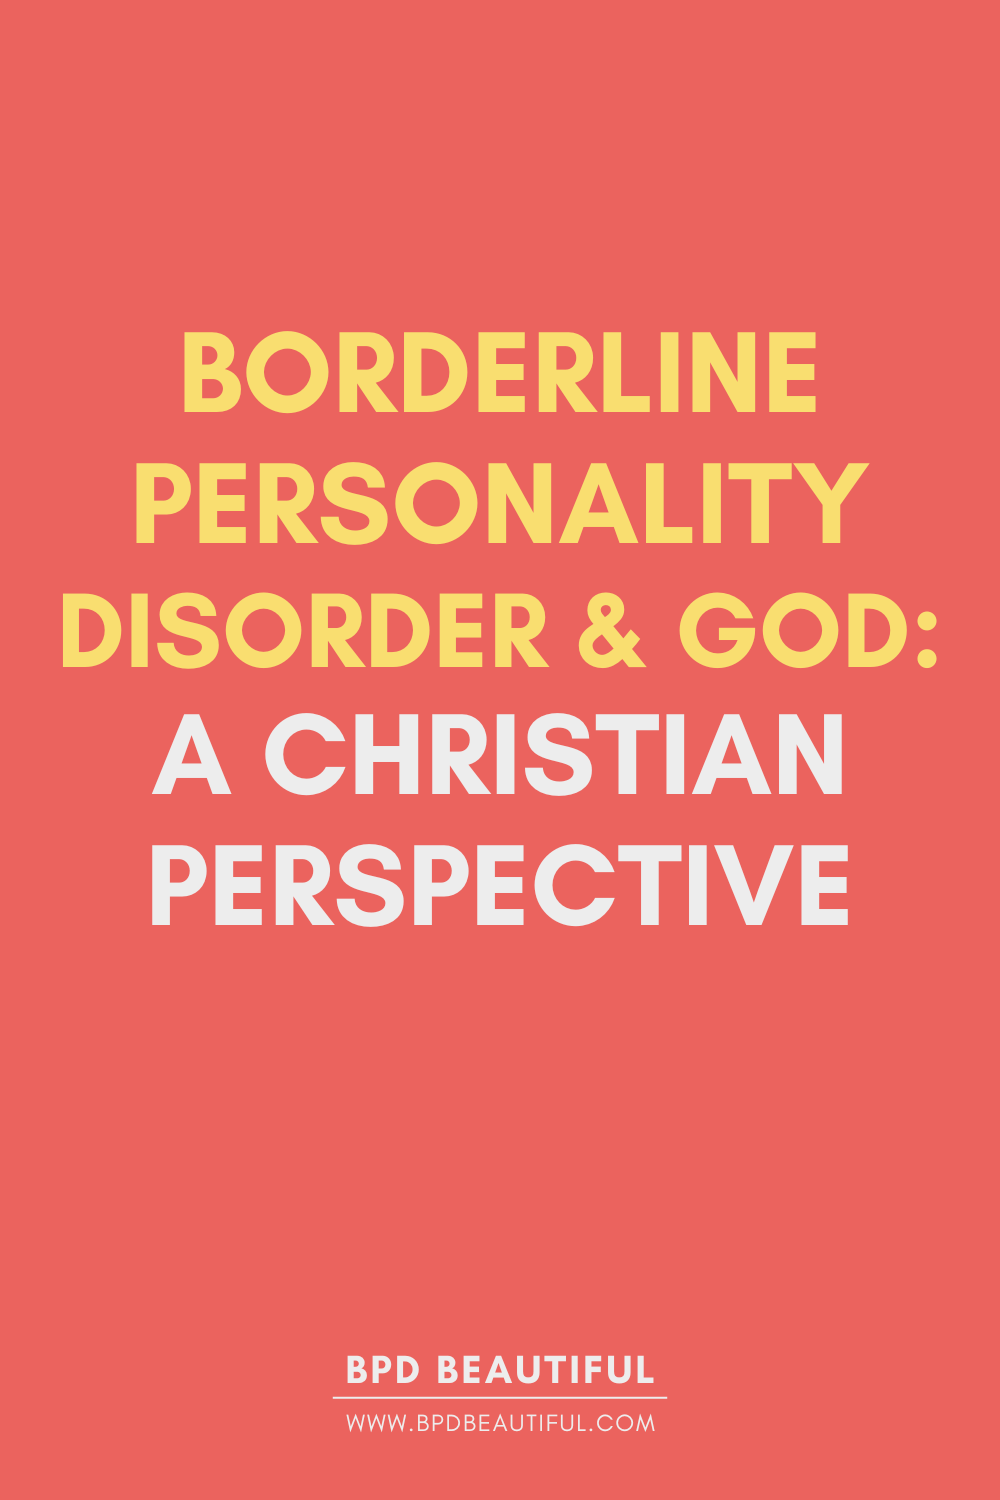 BPD and Christianity: Our Relationship with God